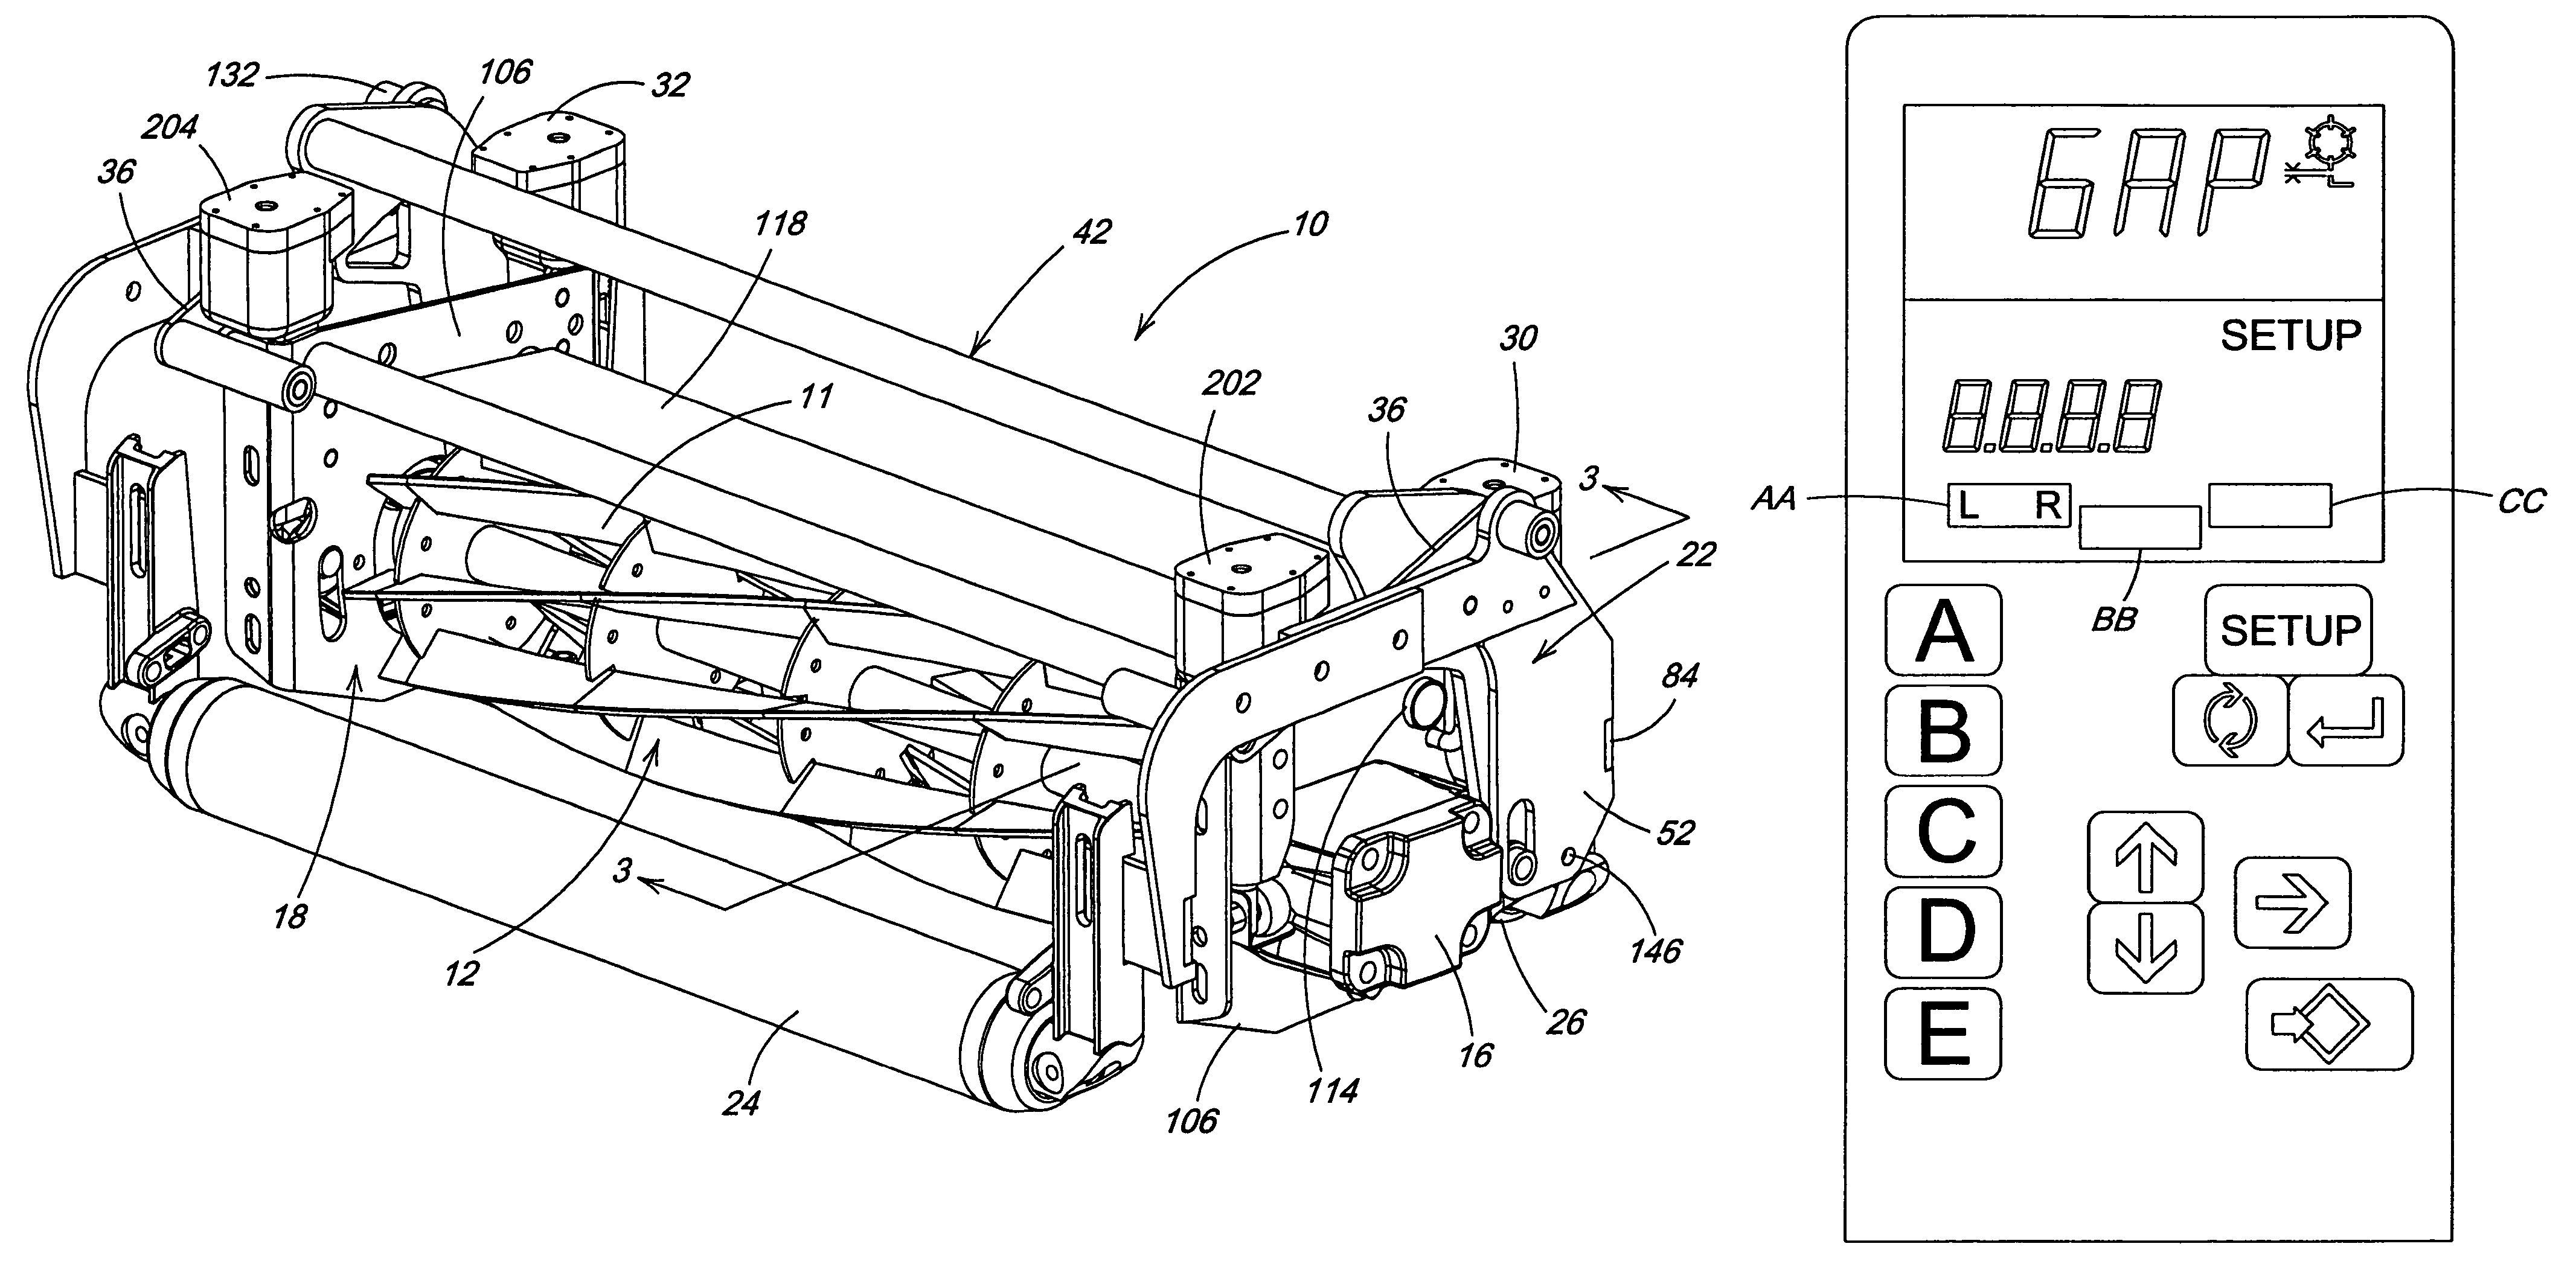 User interface and control for cutting reel system